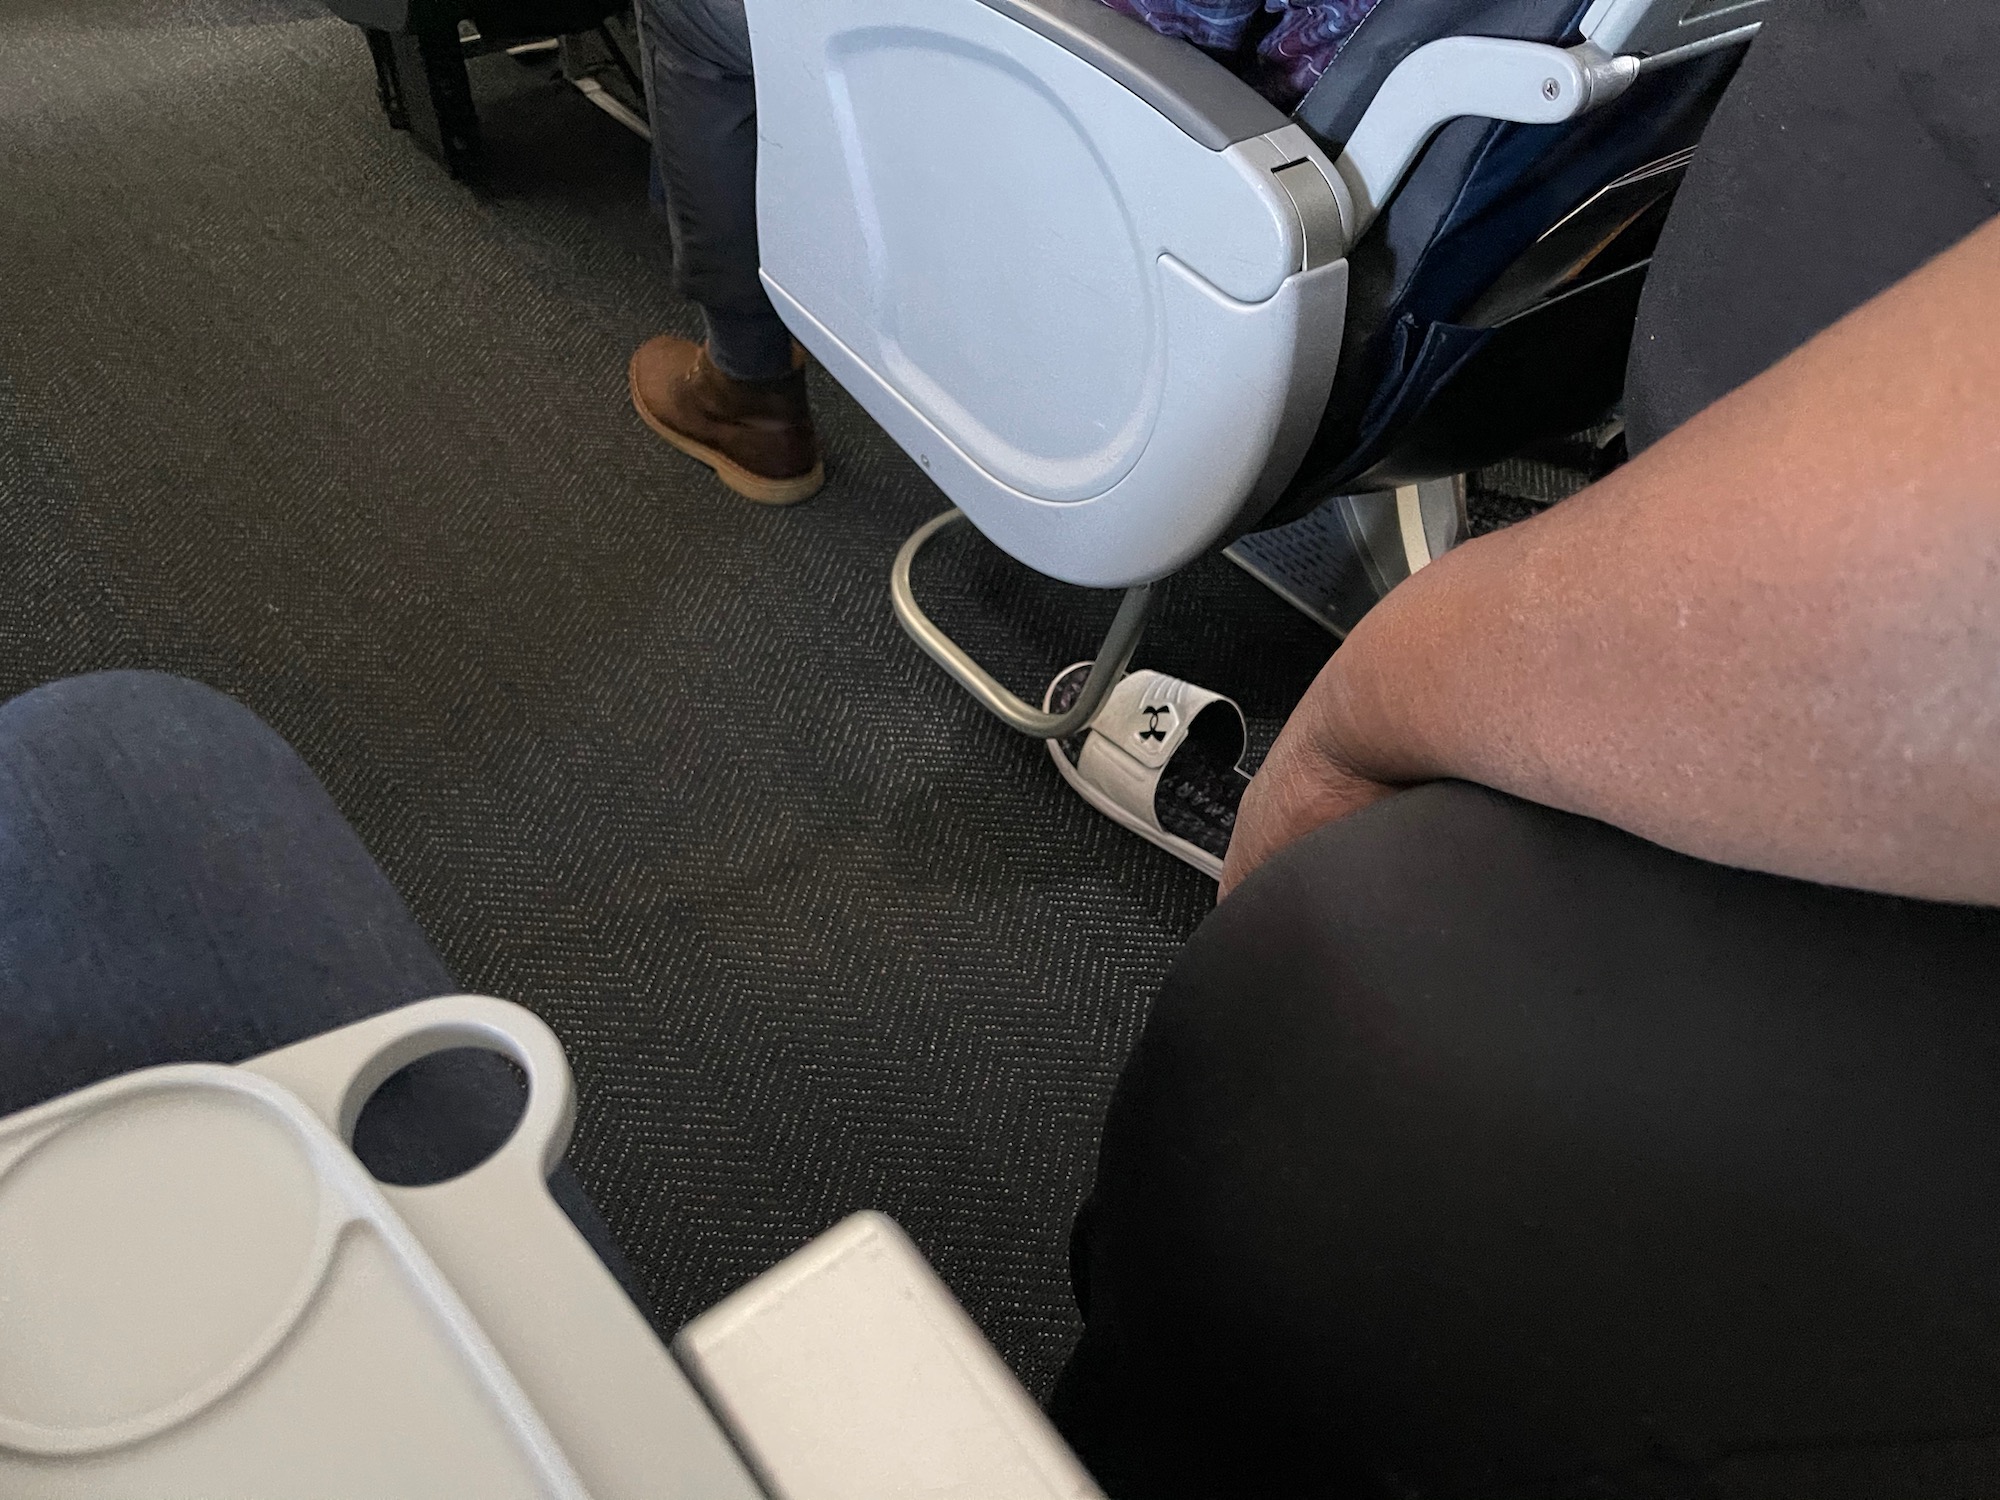 a person sitting in an airplane seat